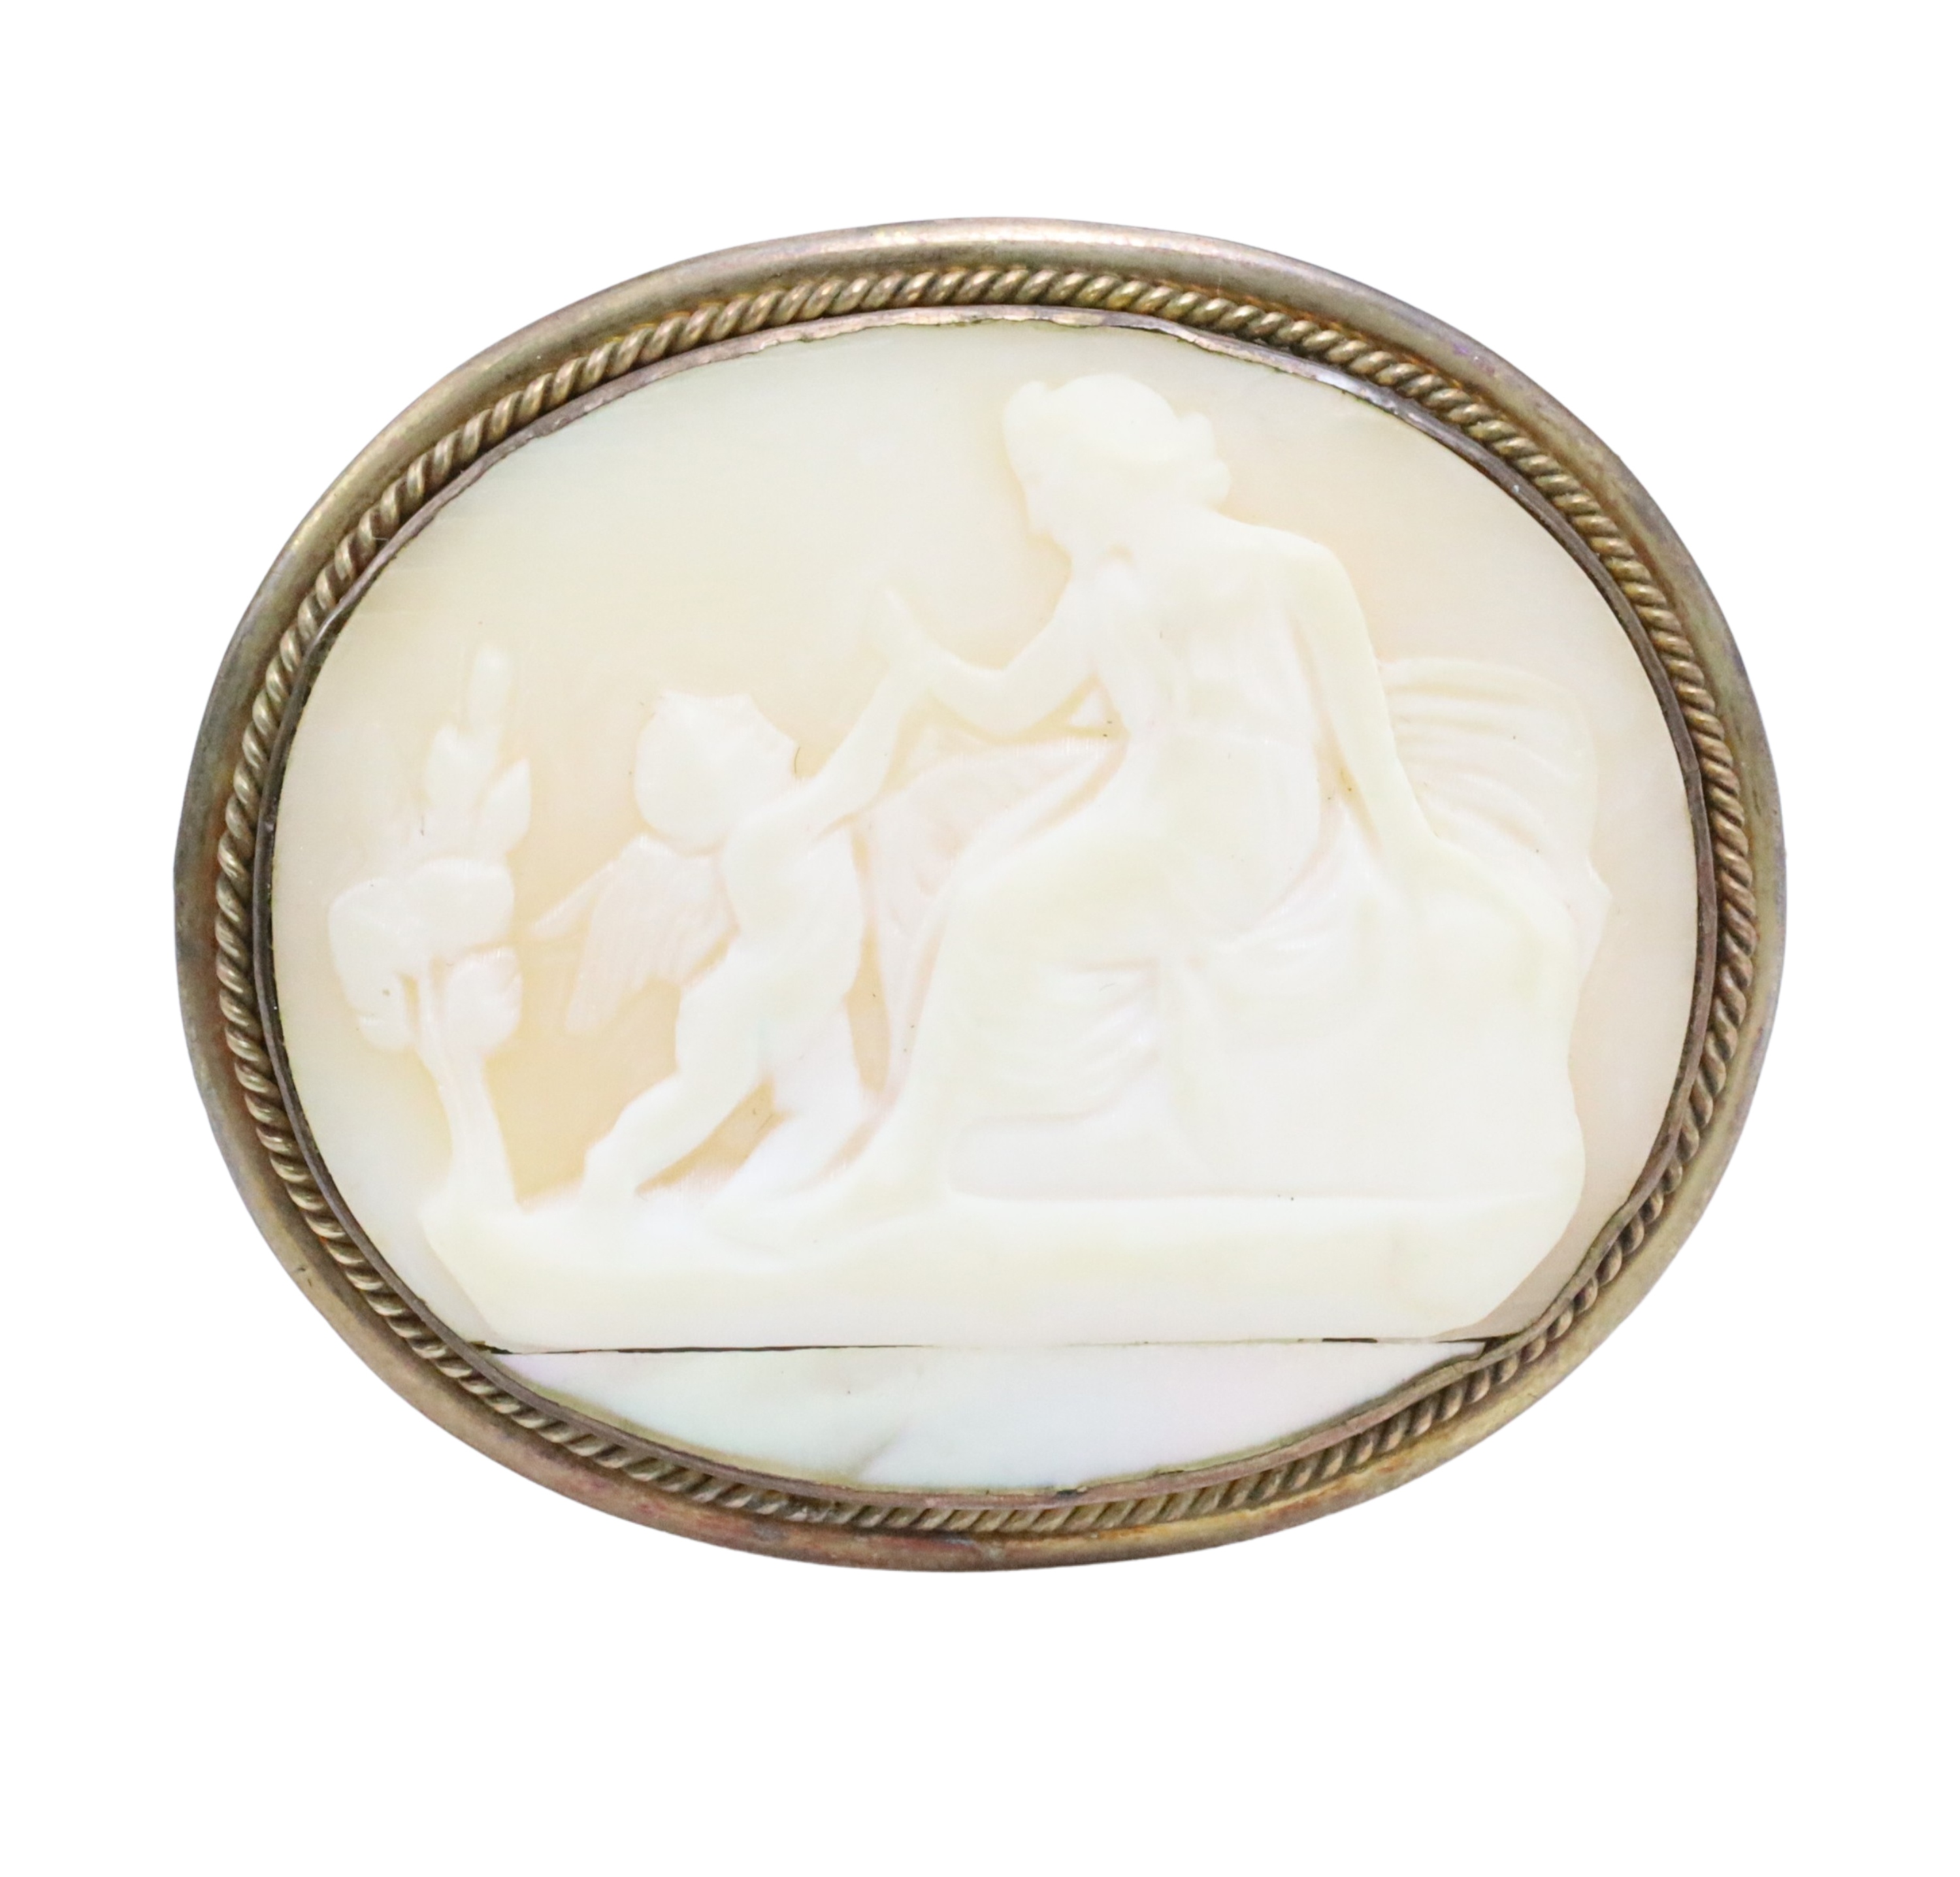 ANTIQUE OVAL CAMEO BROOCH Antique